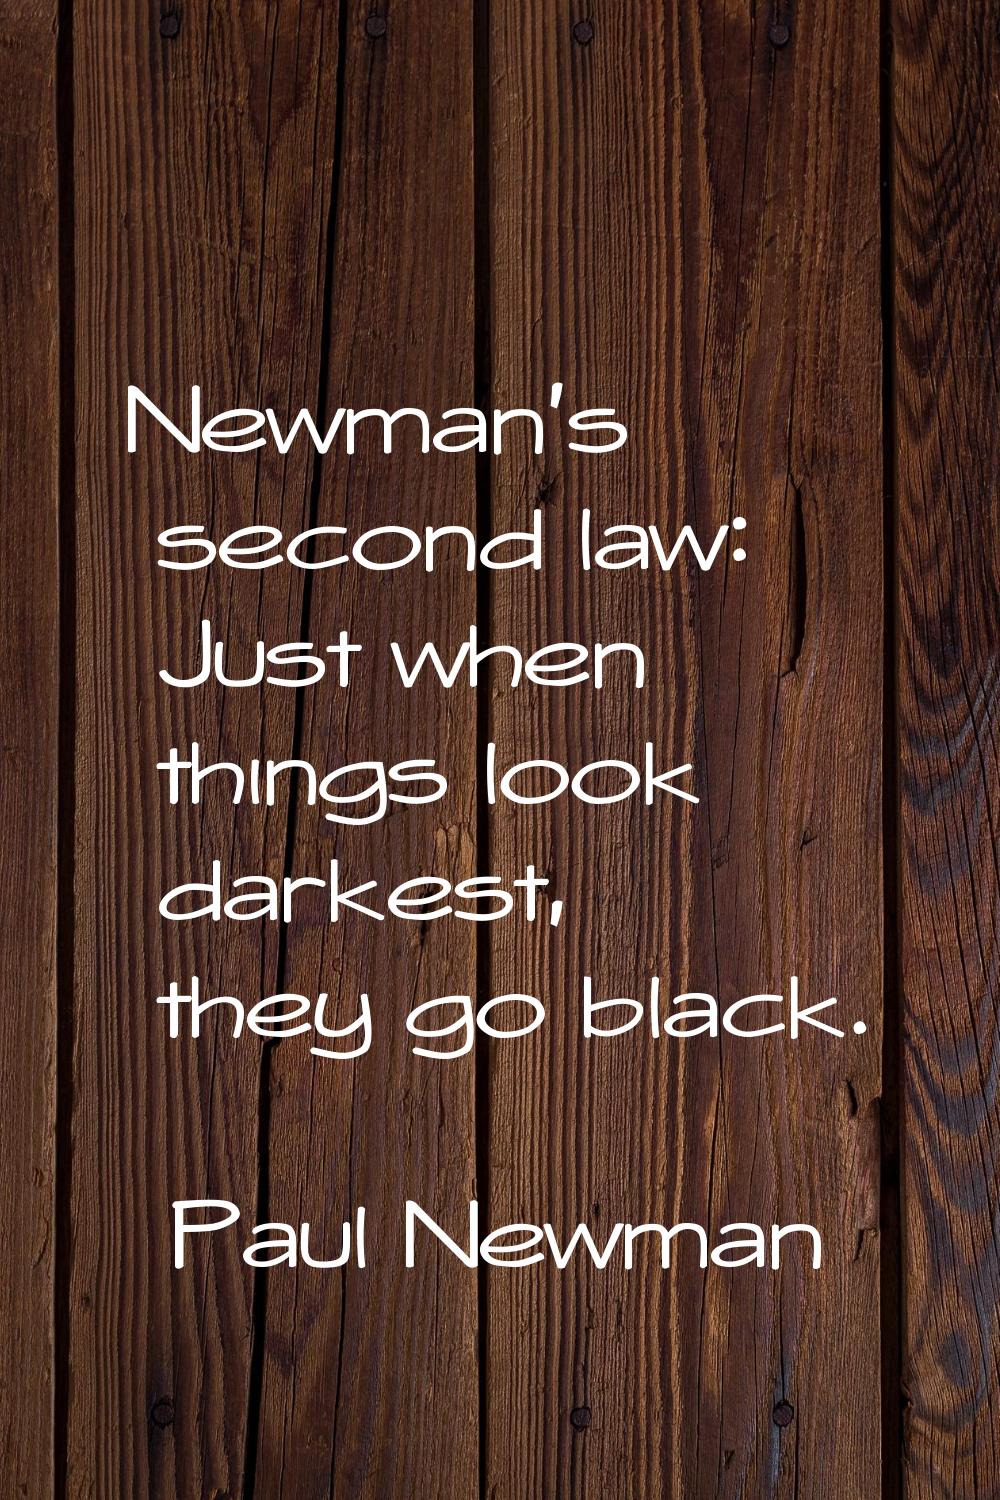 Newman's second law: Just when things look darkest, they go black.